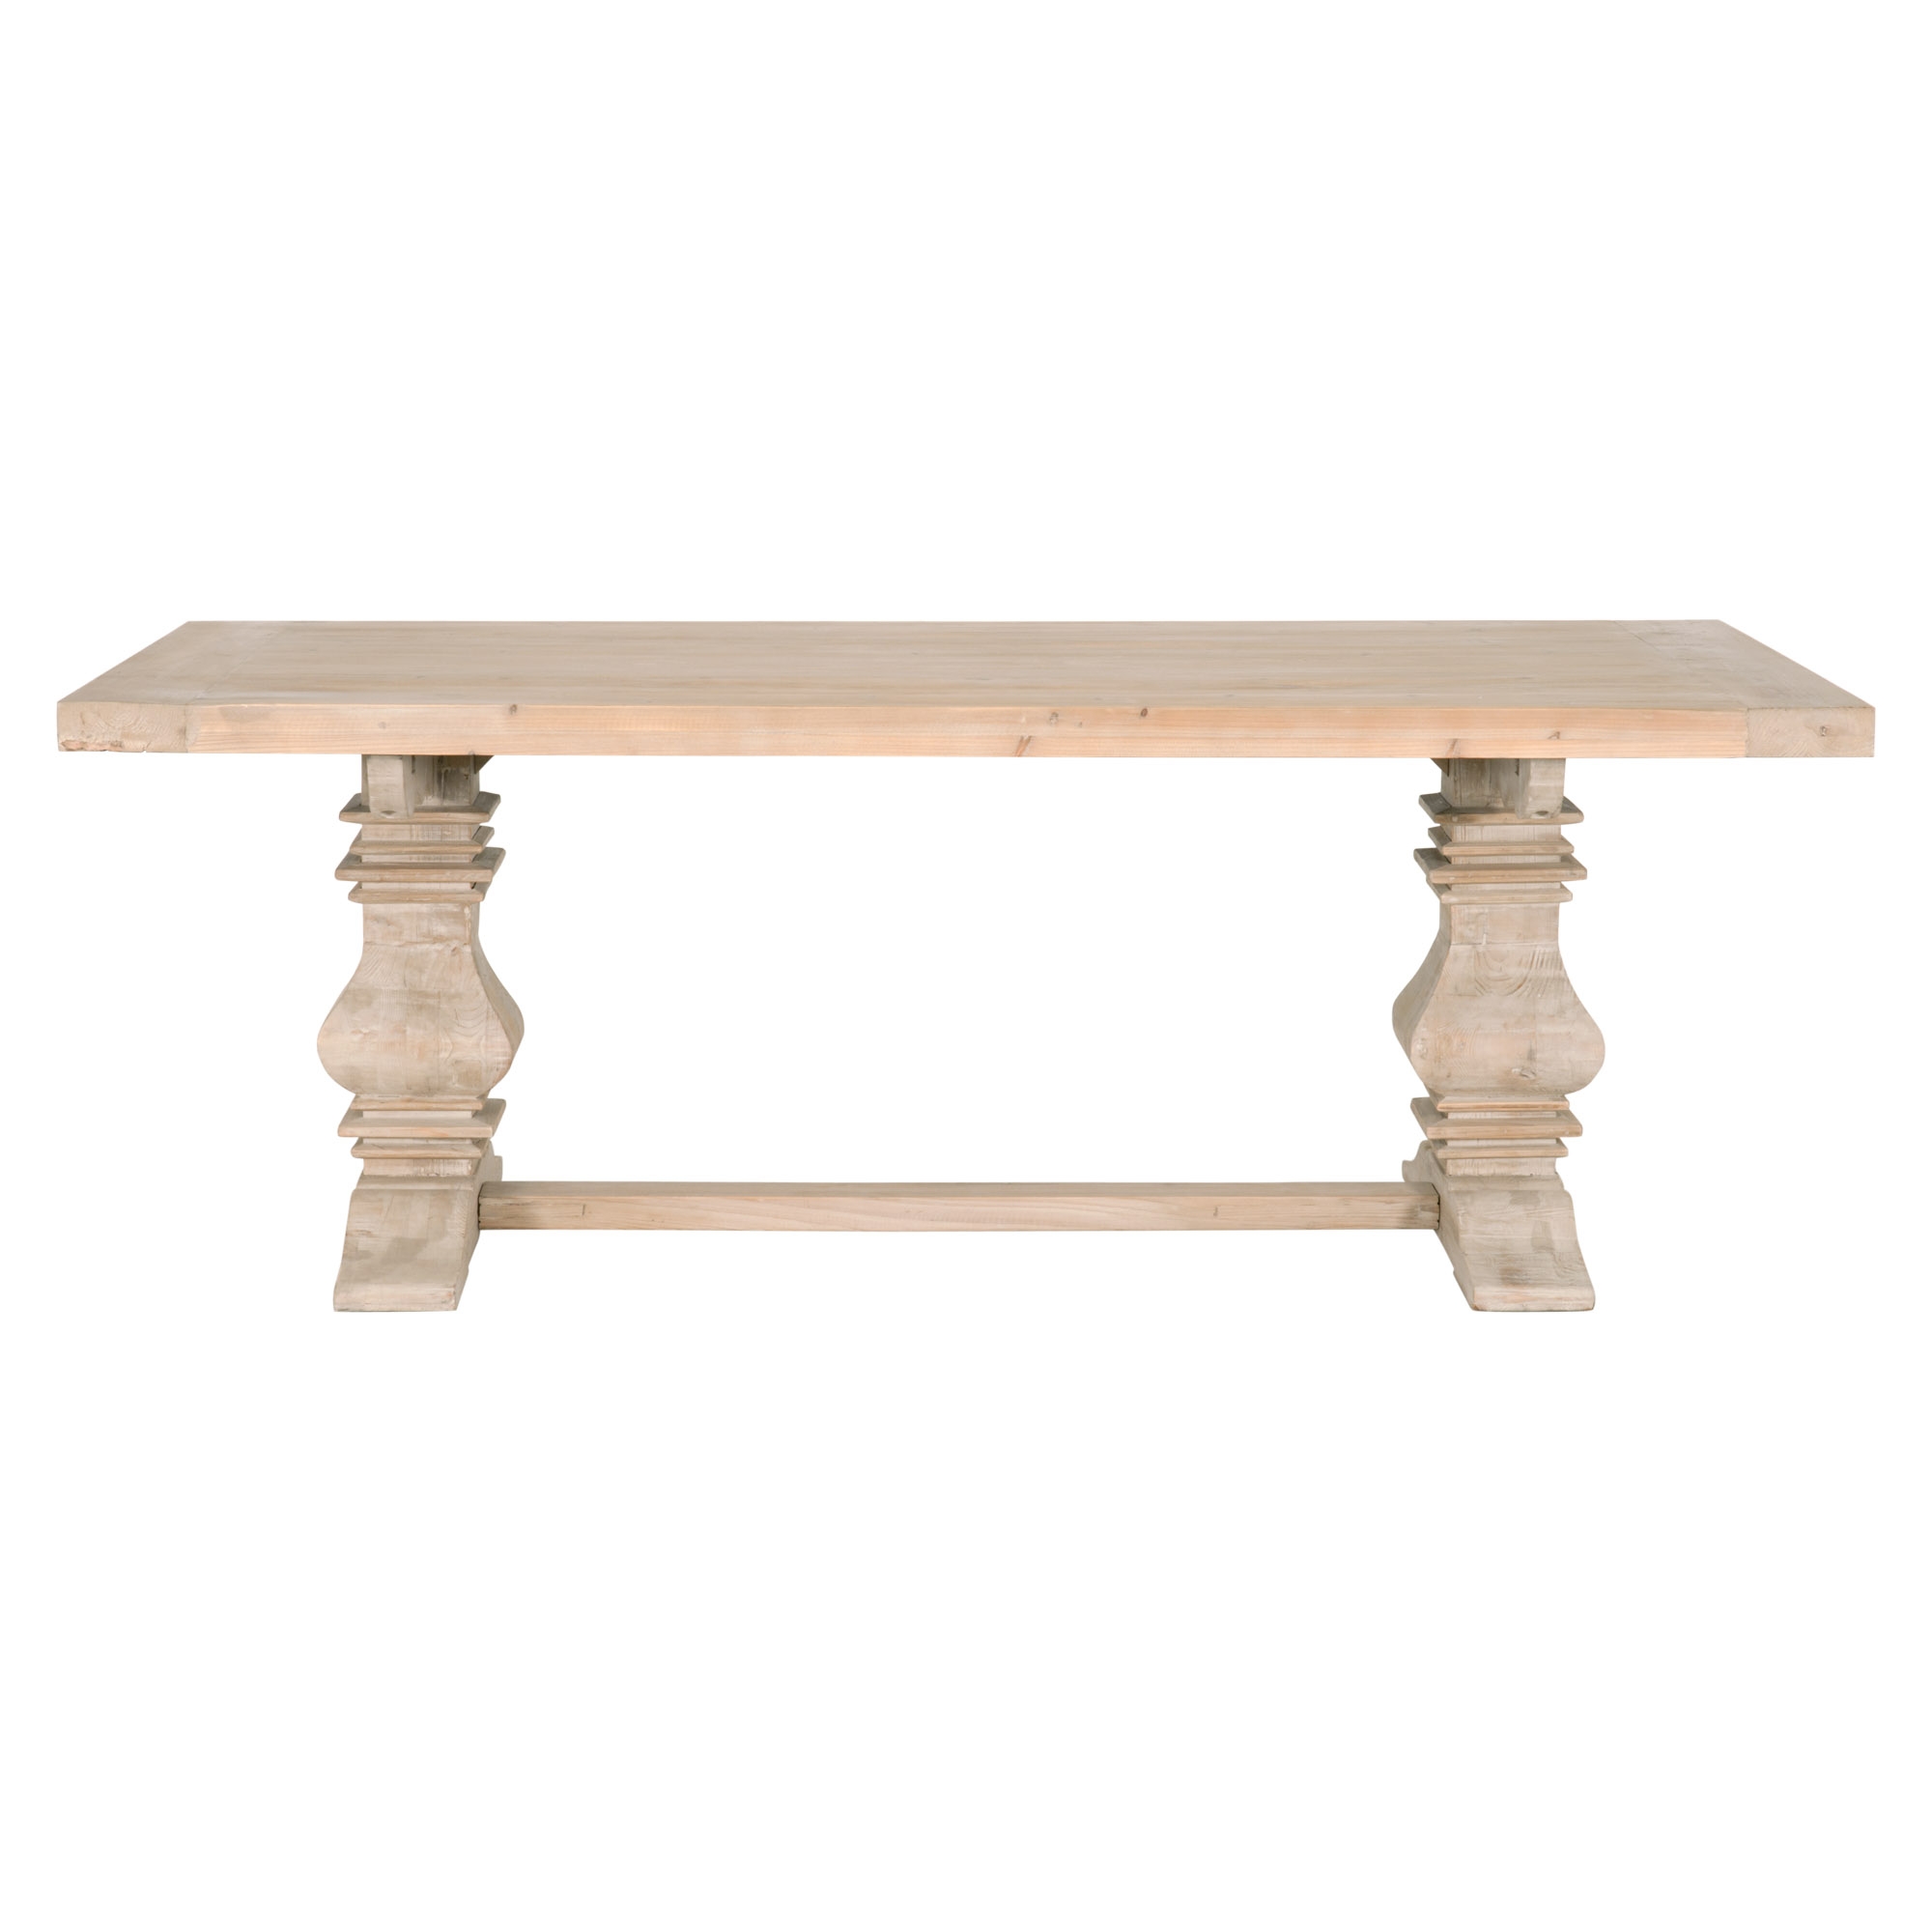 Monastery Extension Dining Table - Image 2